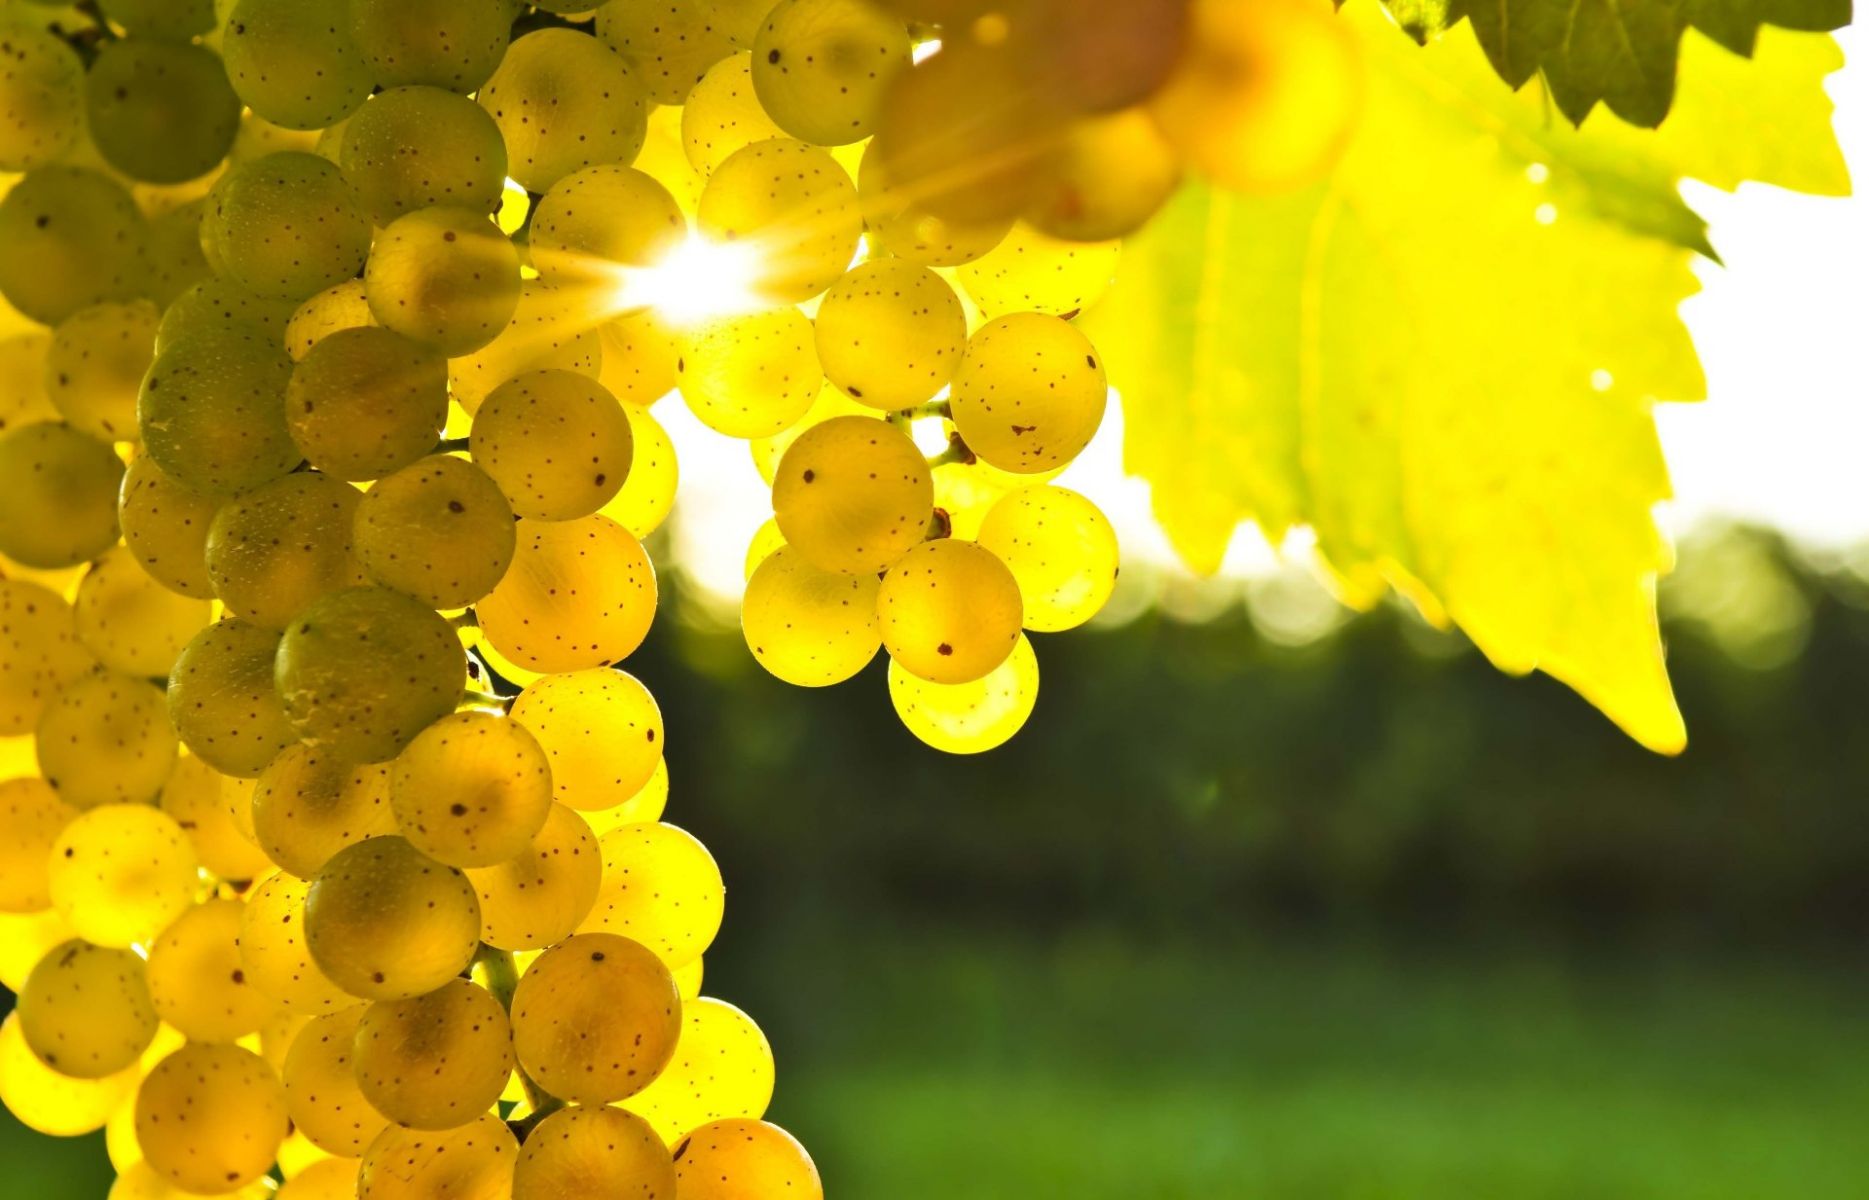 Yellow Grapevine HD Nature Wallpaper For Mobile And Desktop